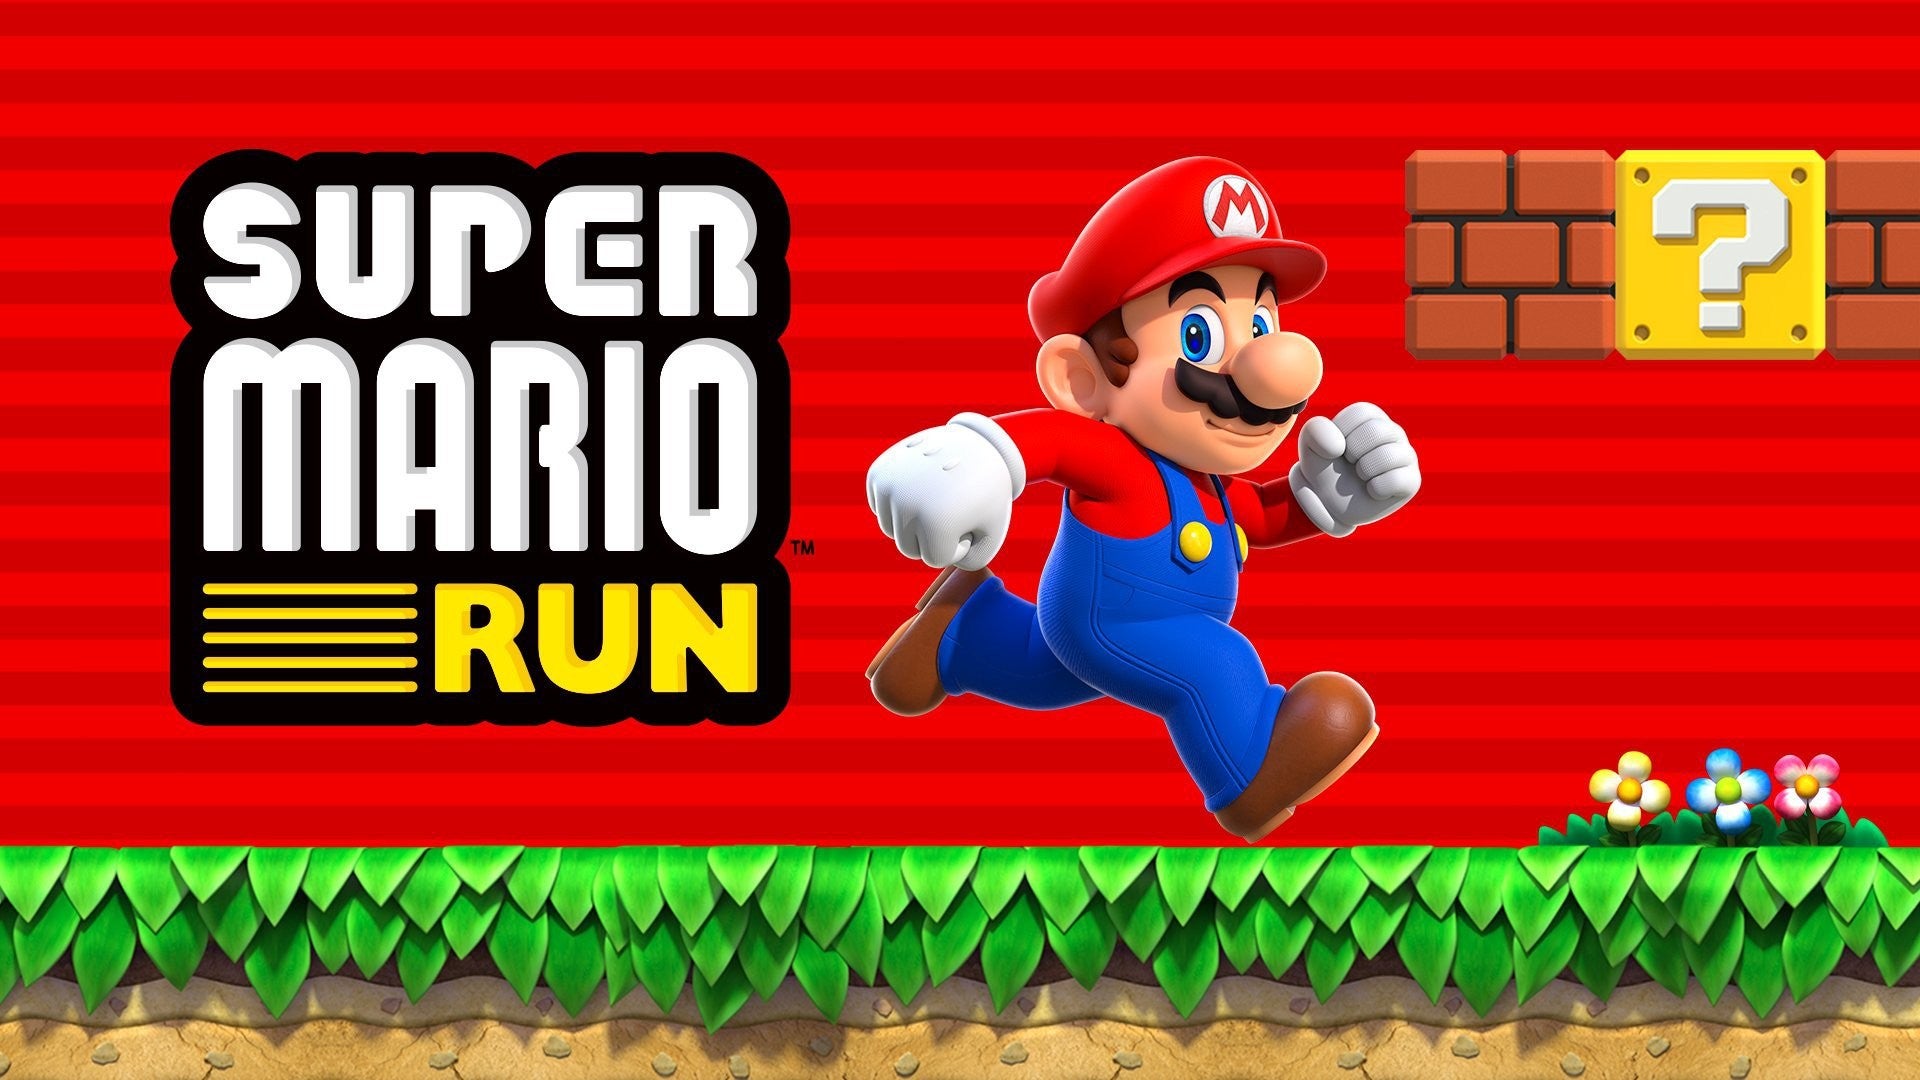 You can now play Super Mario Run at Apple Stores in the U.S.